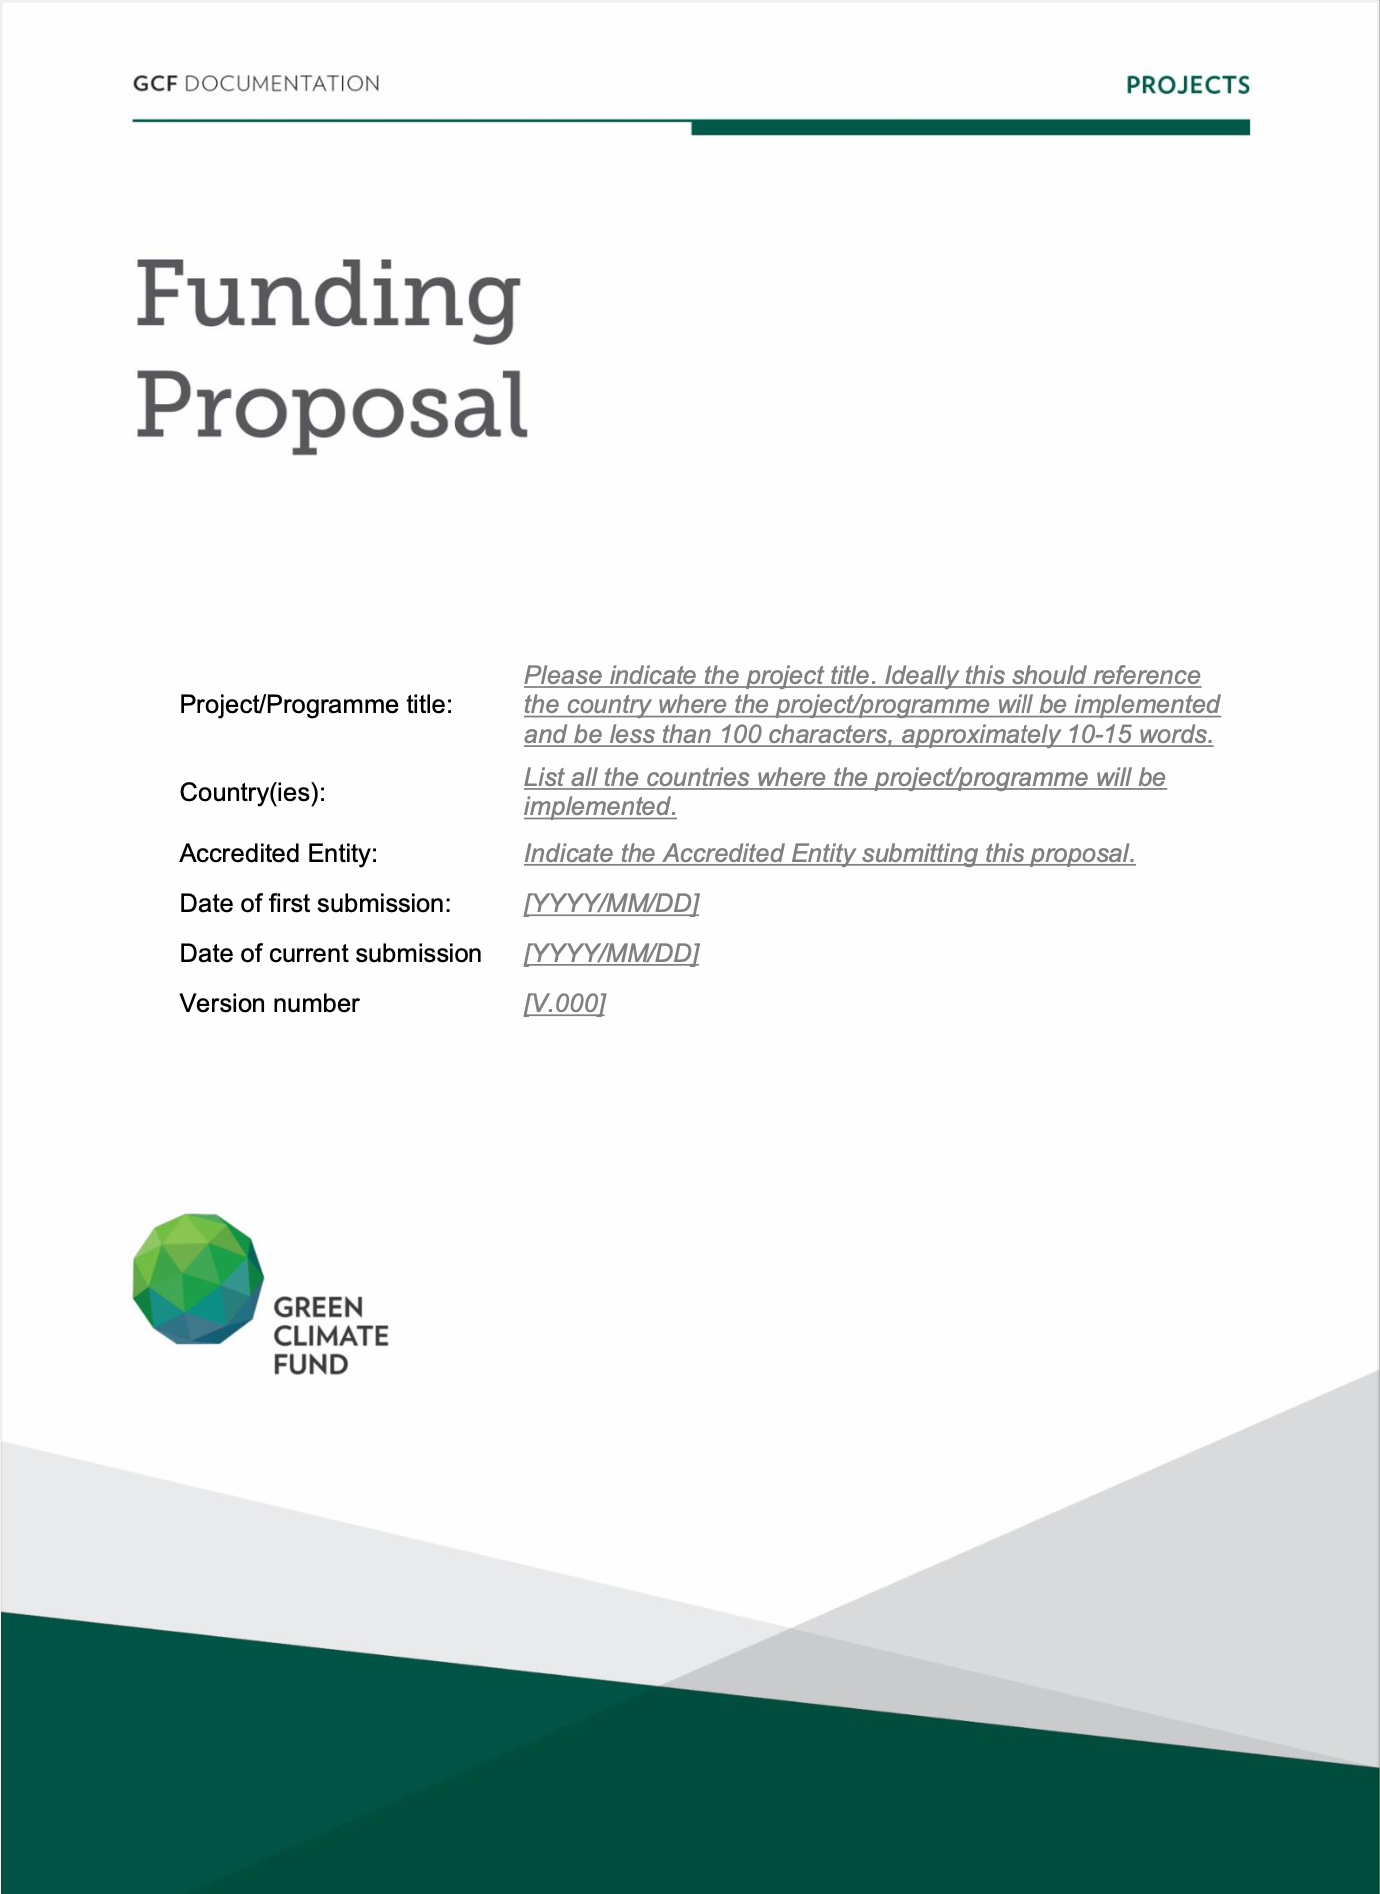 Funding Proposal template